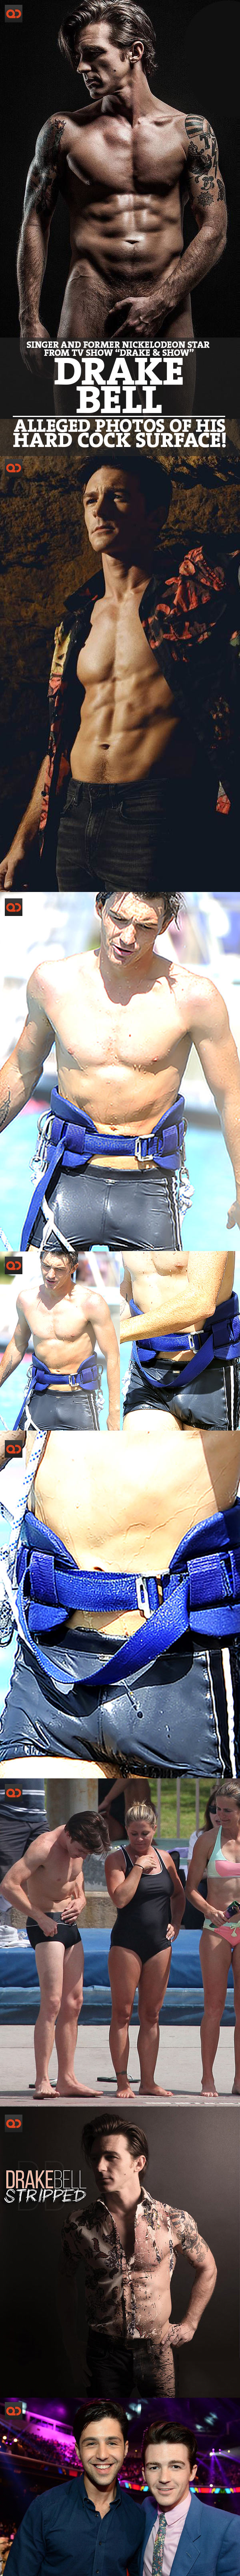 Drake Bell, Singer And Former Nickelodeon Star From TV Show “Drake And Show”,  Alleged Photos Of His Hard Cock Surface!